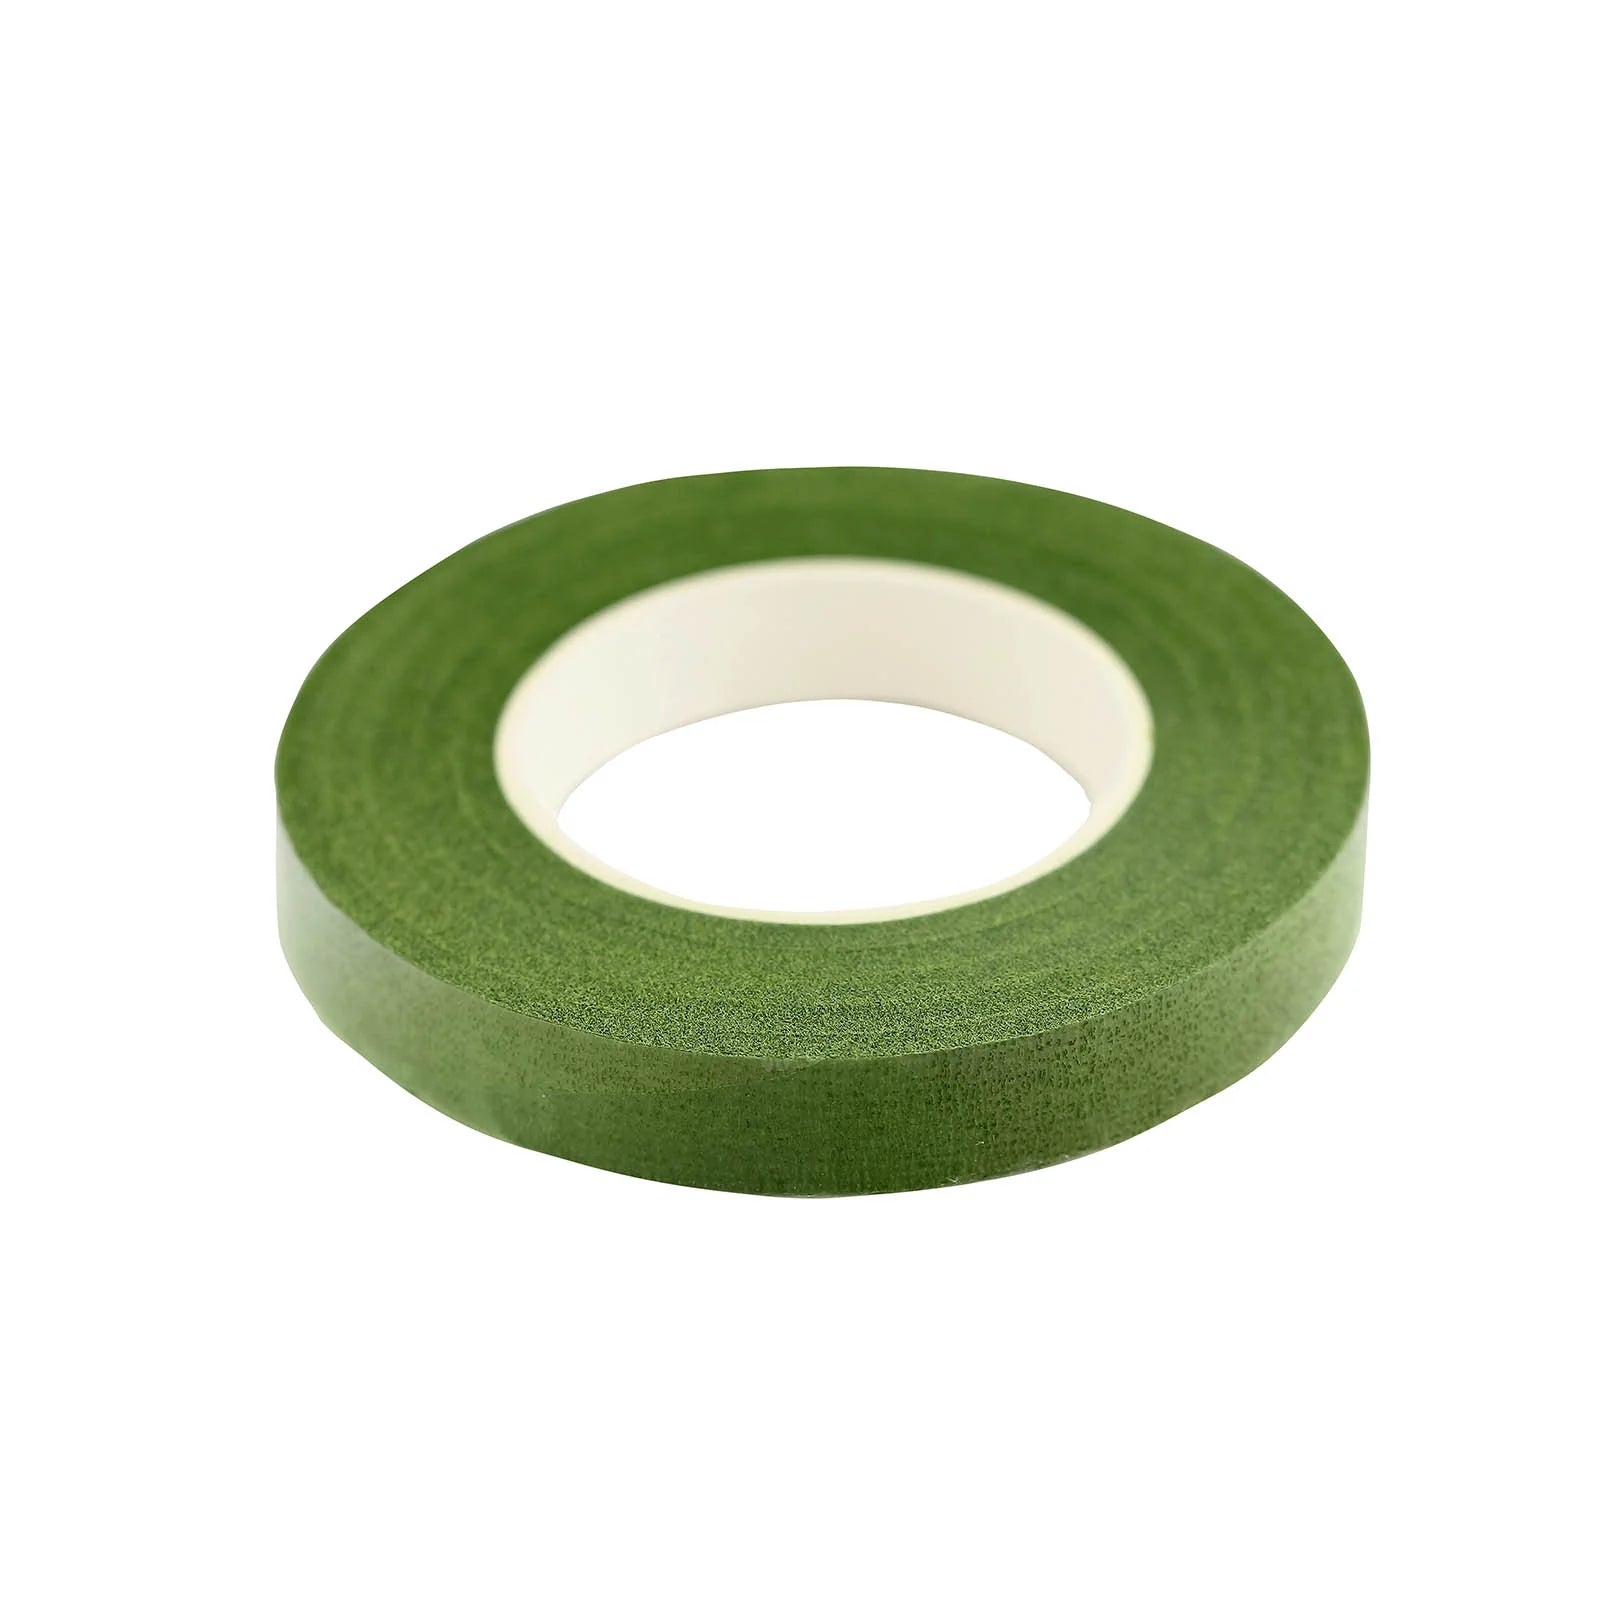 Tape, Floral Bouquet Stem Wrap Tape, (Green or Gold color) - 2